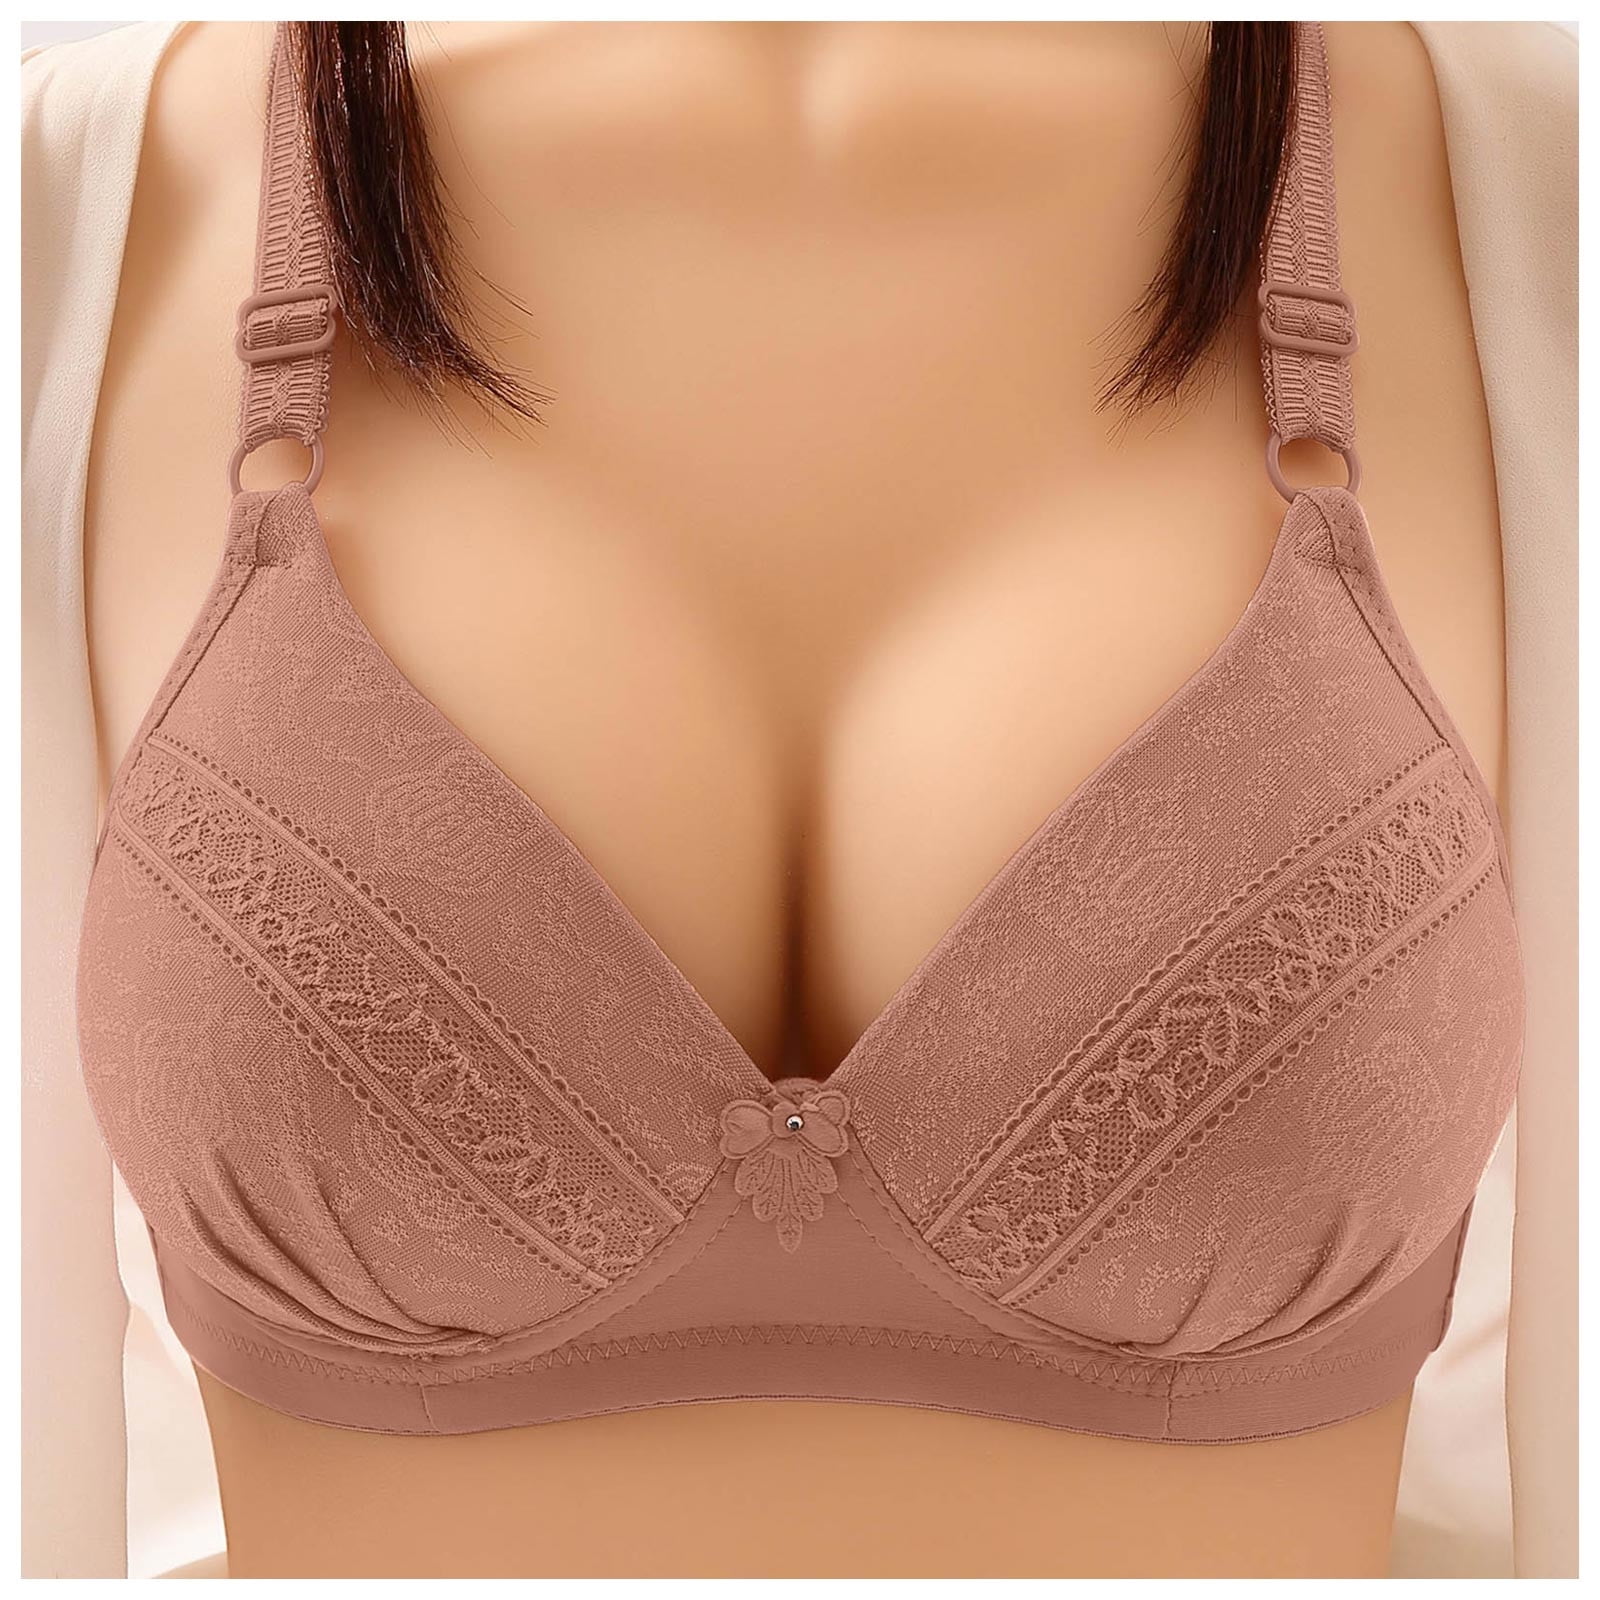 Bras Women S Underwear Without Steel Ring Big Breast Show Small And Thin  Push Up Anti SAG Adjustable Lace Sexy Bra From 15,85 €